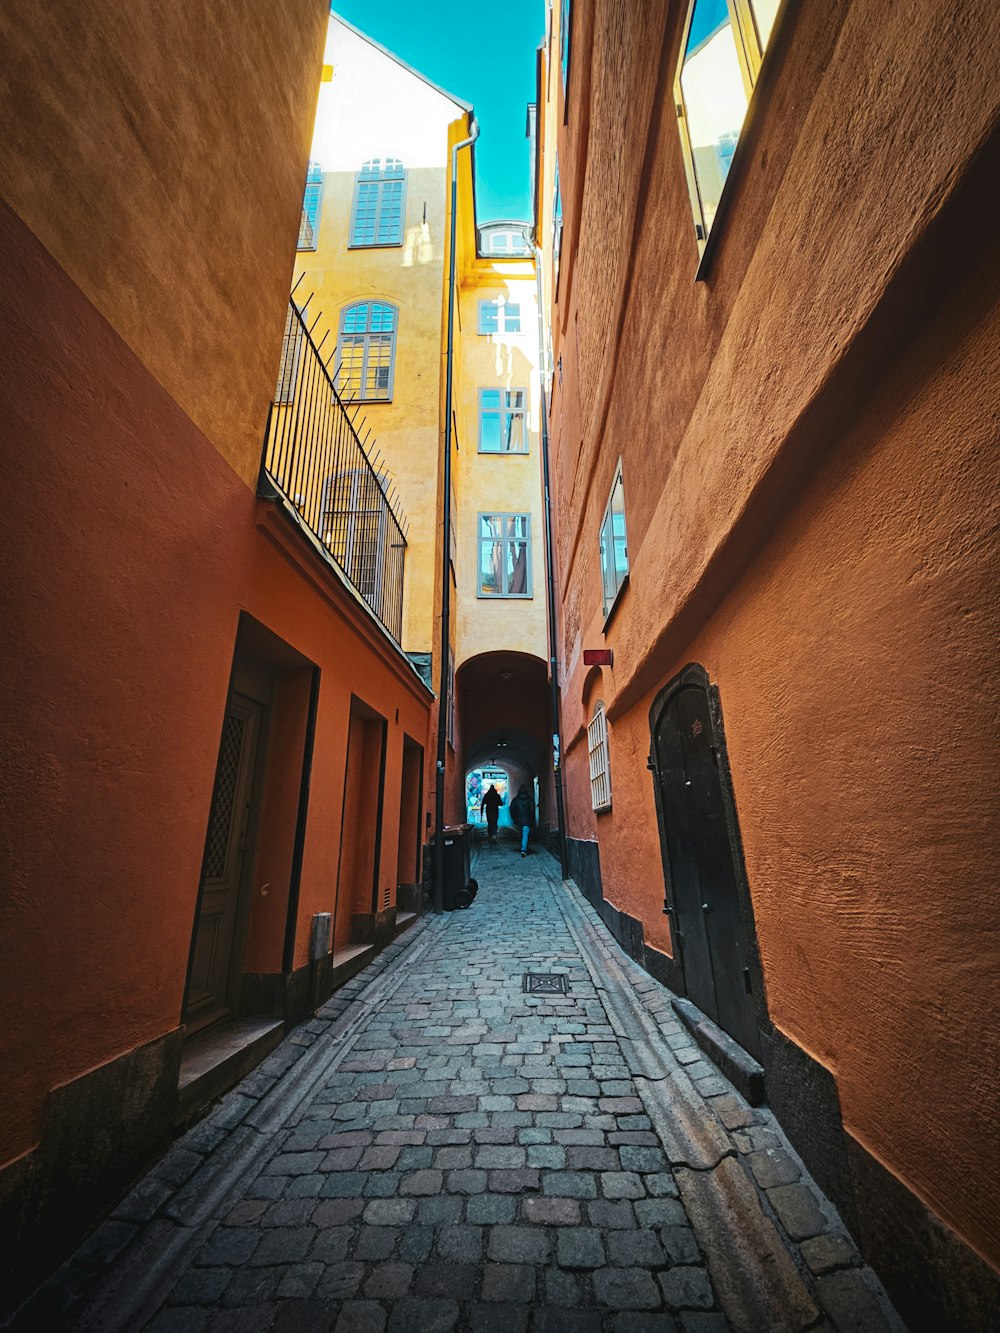 a narrow alley way with people walking down it